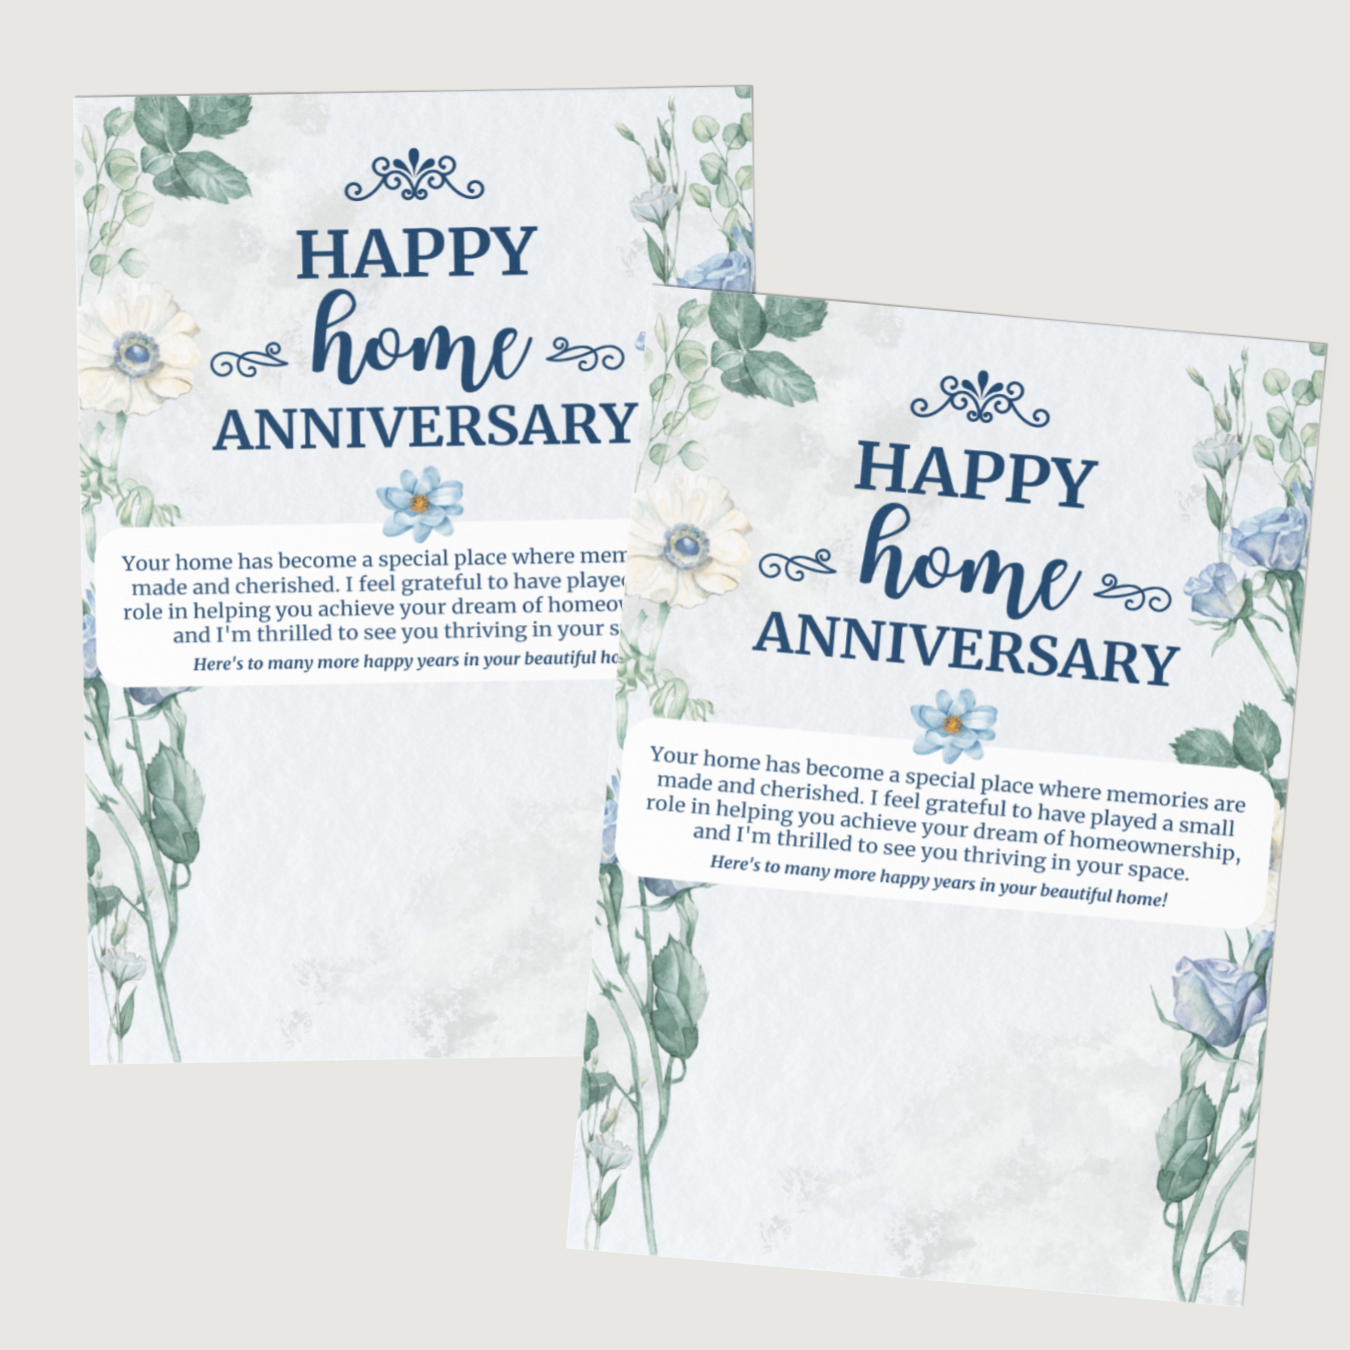 Happy Home Anniversary - Real Estate Card